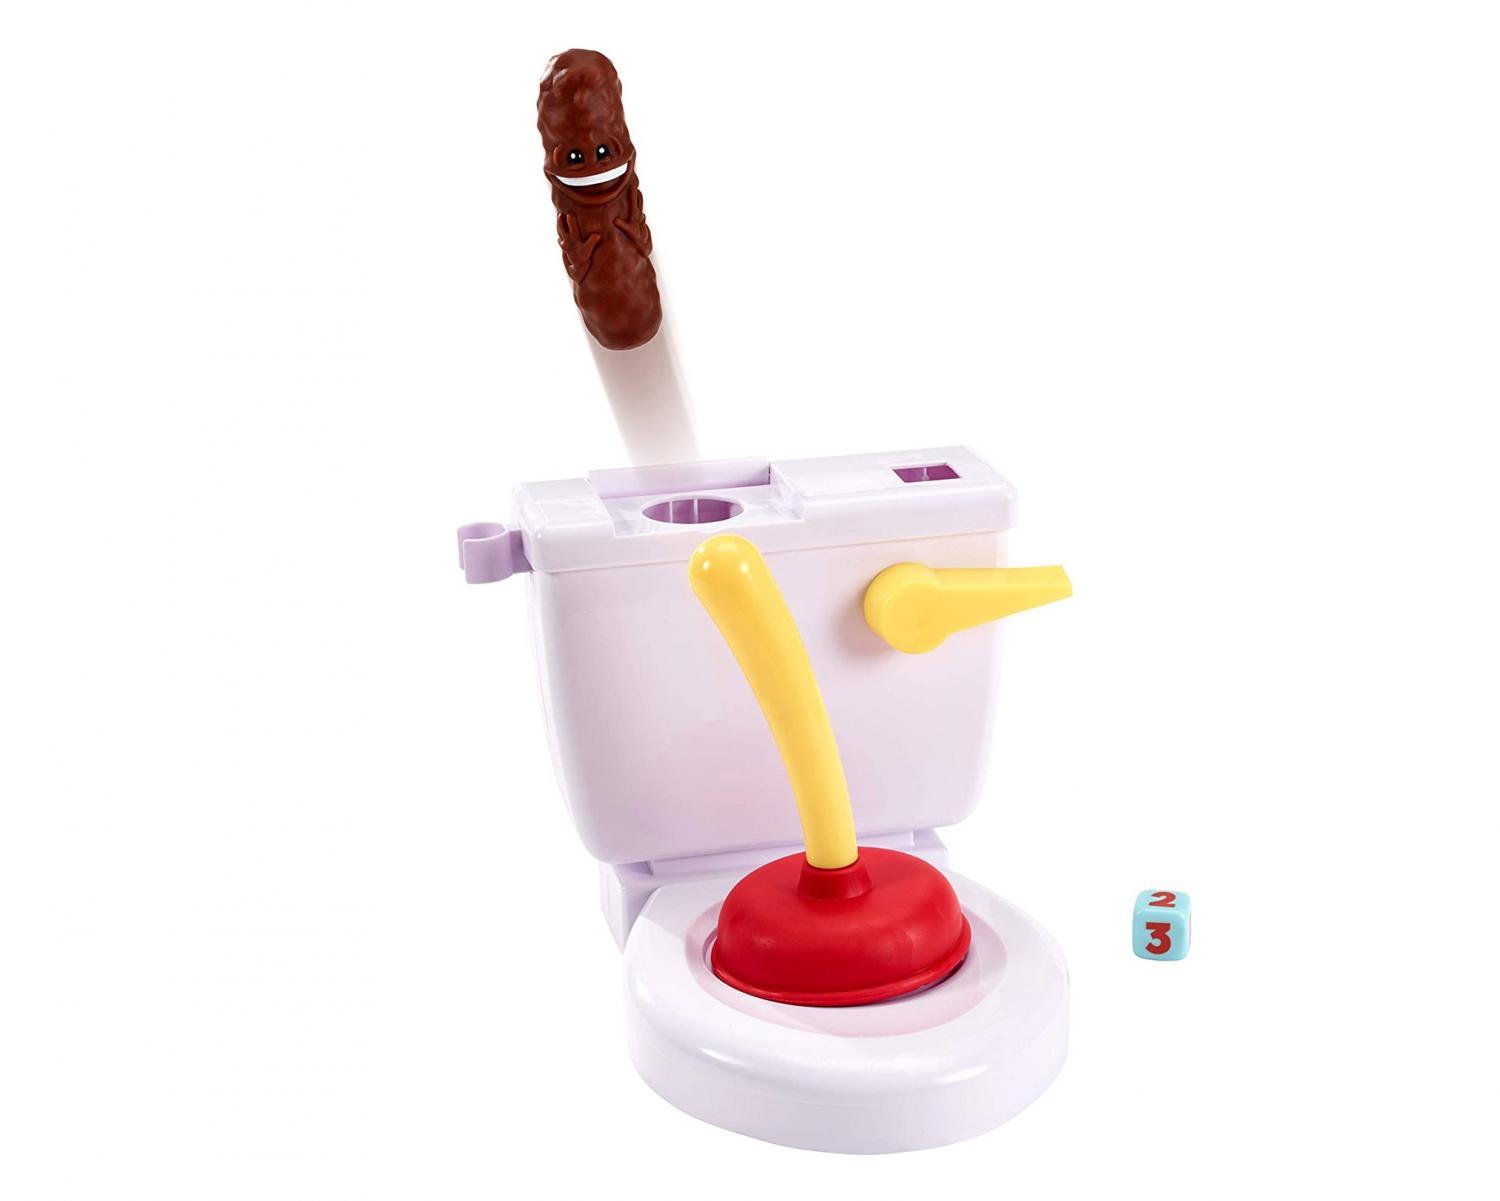 Flushin Frenzy Toilet Kids Game With Flying Poop after plunging toilet